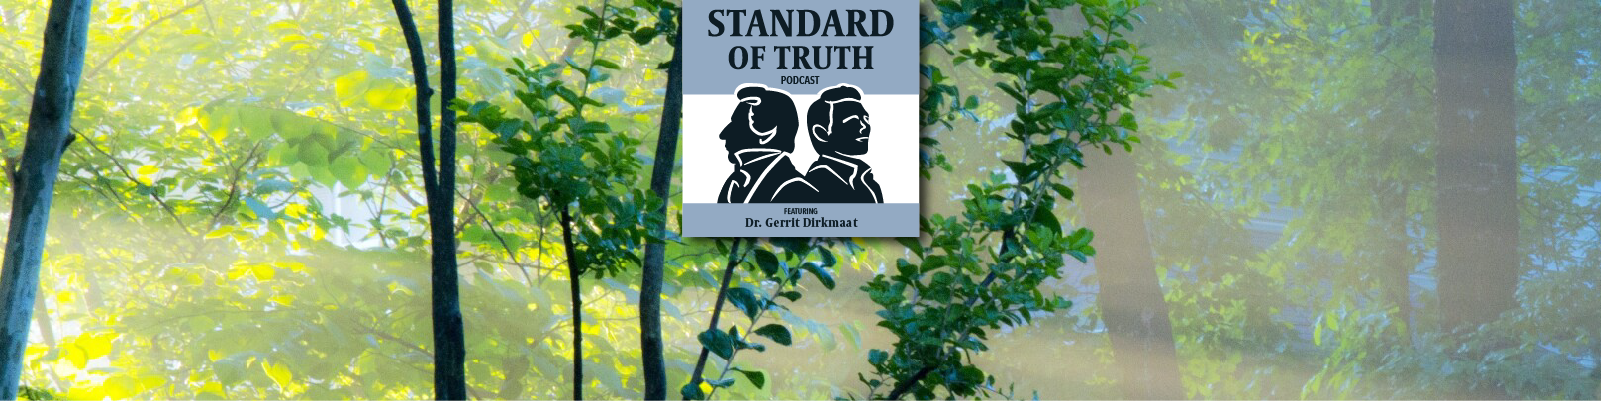 Standard of Truth